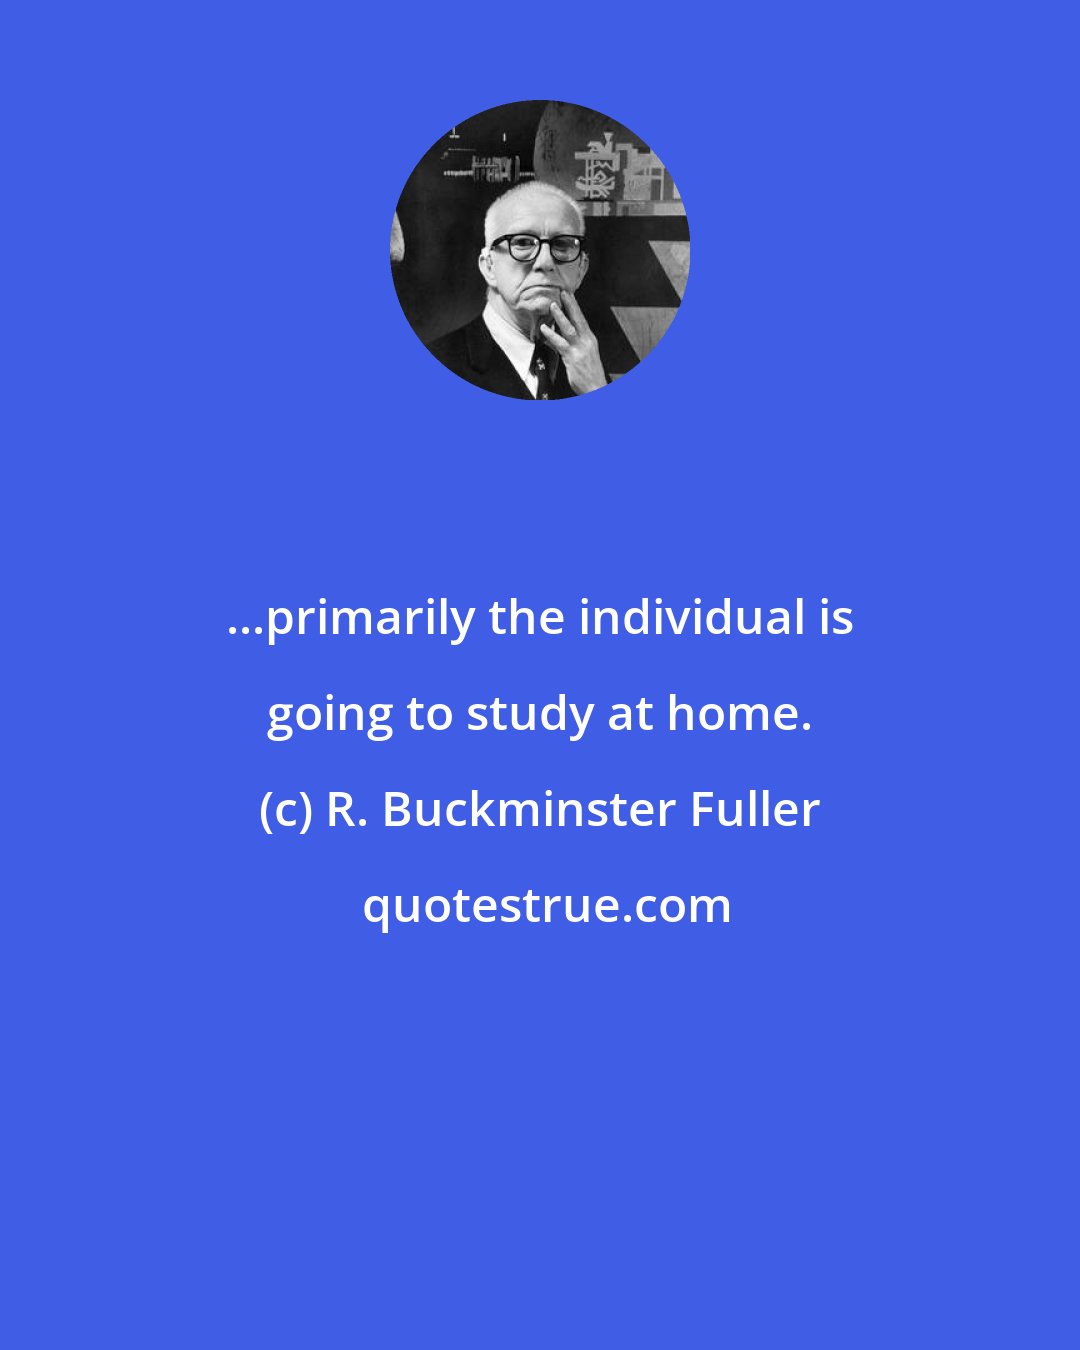 R. Buckminster Fuller: ...primarily the individual is going to study at home.